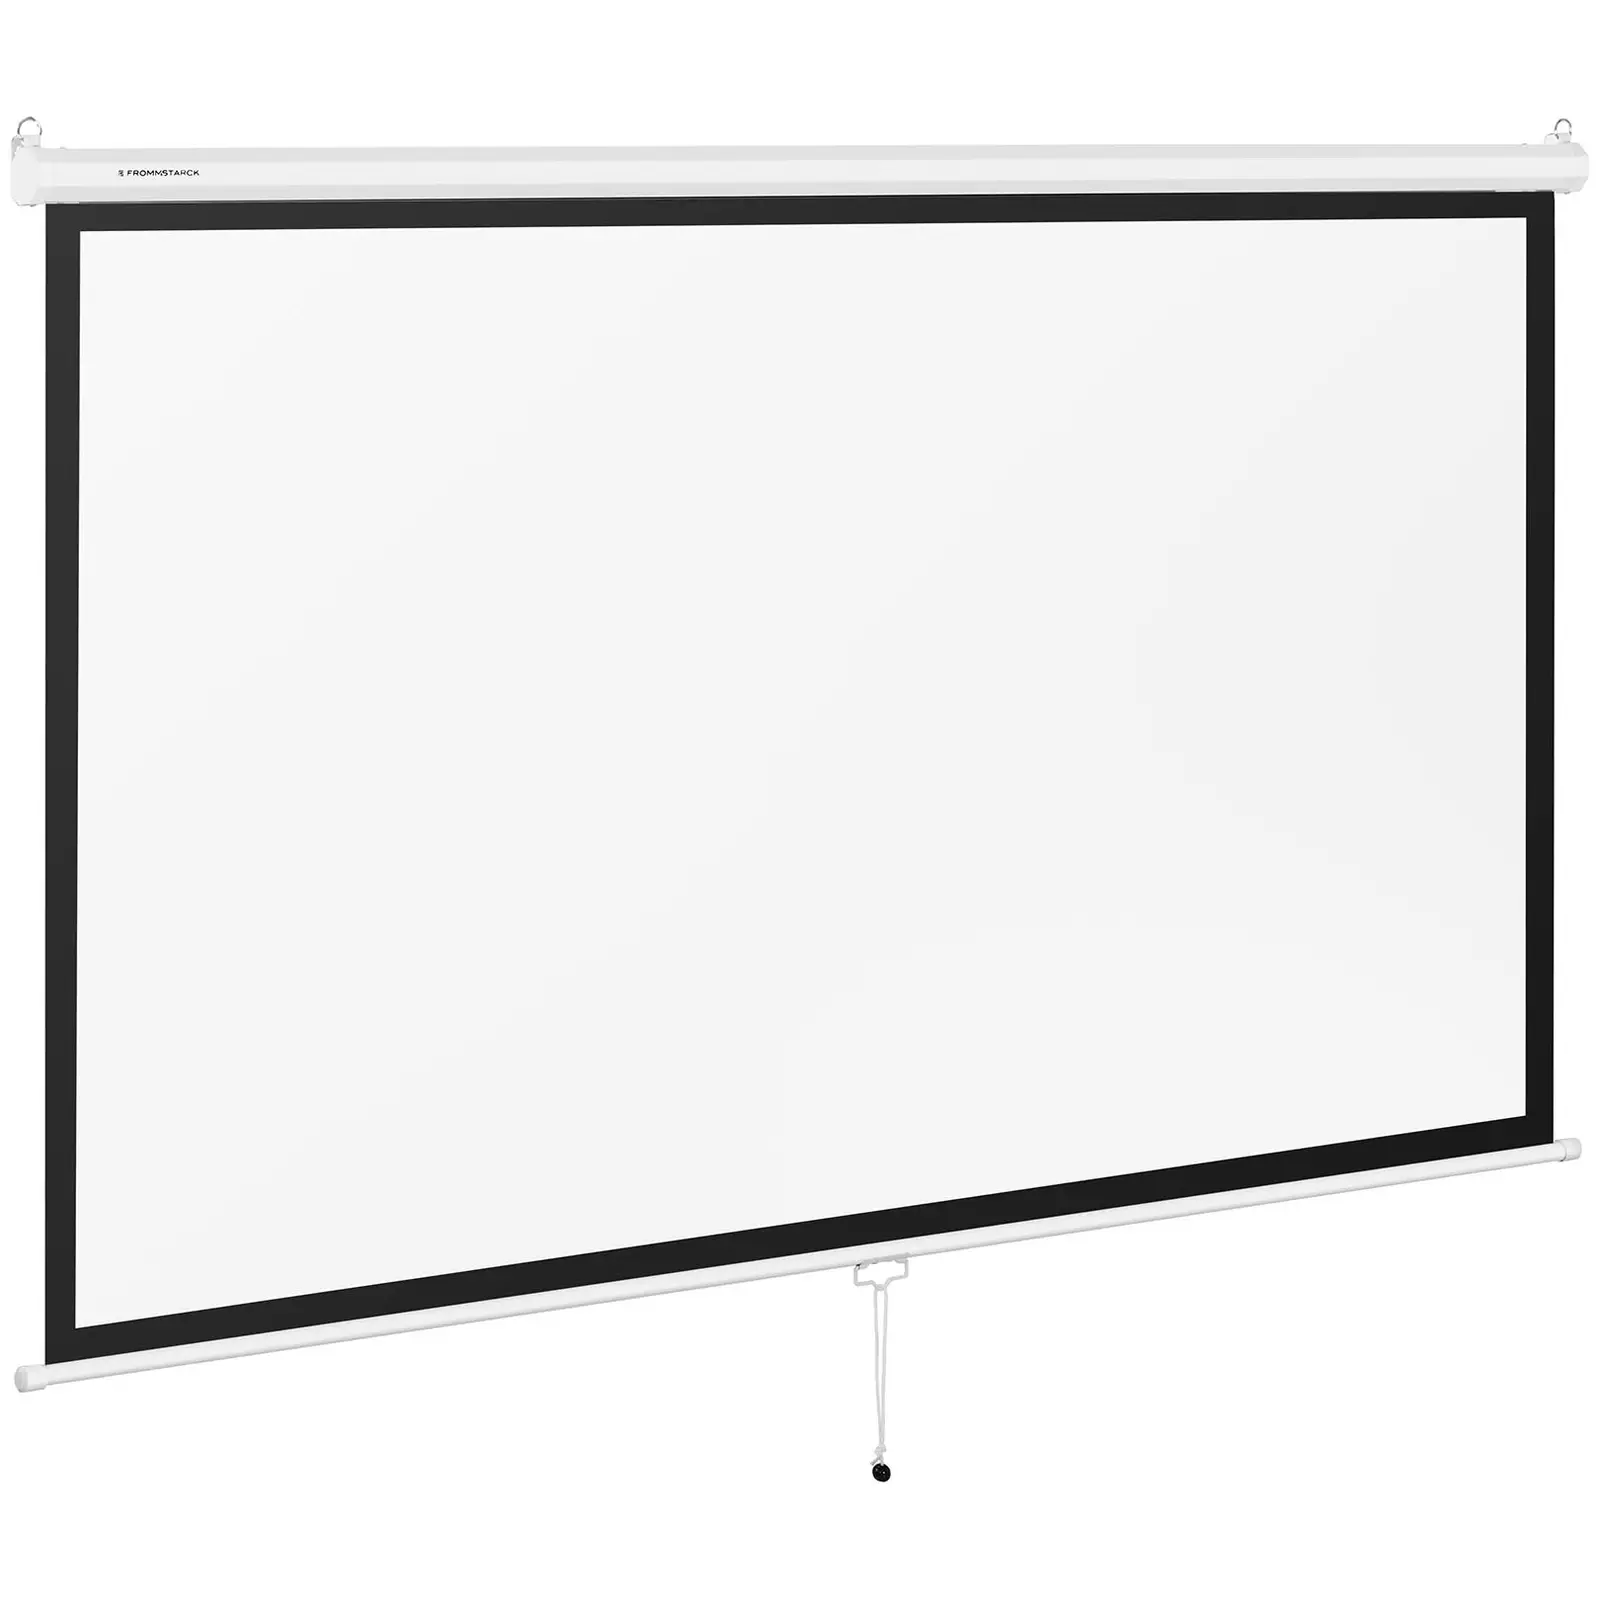 Factory second Projection Screen - 229.5 x 145 cm - 16:9